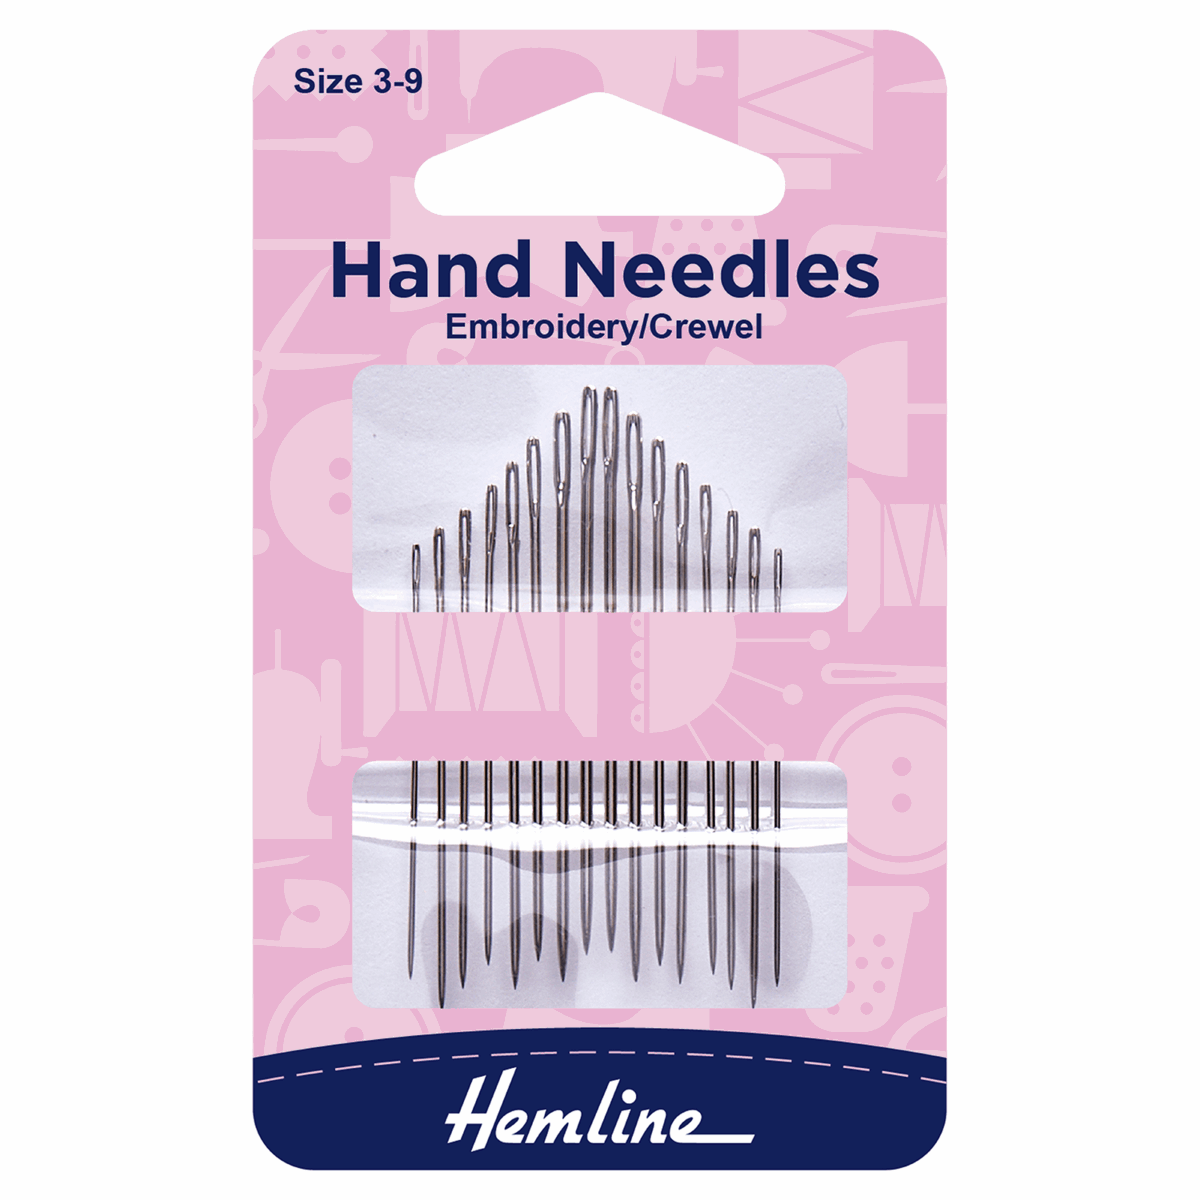 Hemline Hand Sewing Needles: Embroidery/Crewel: Size 3-9